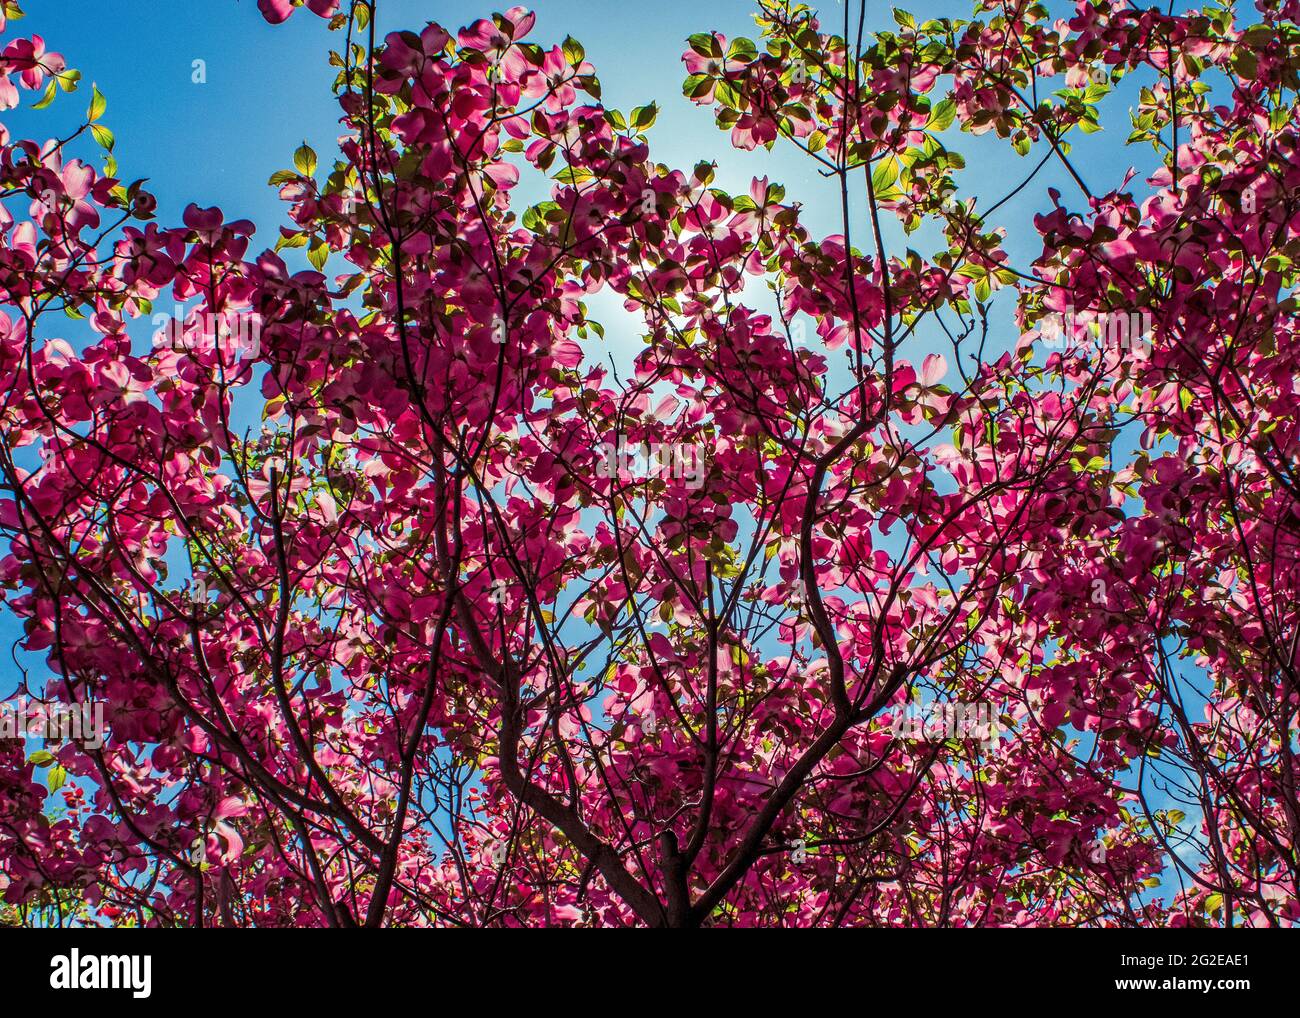 The sun hidden behind the canopy of a pink blossoming dogwood tree Stock Photo